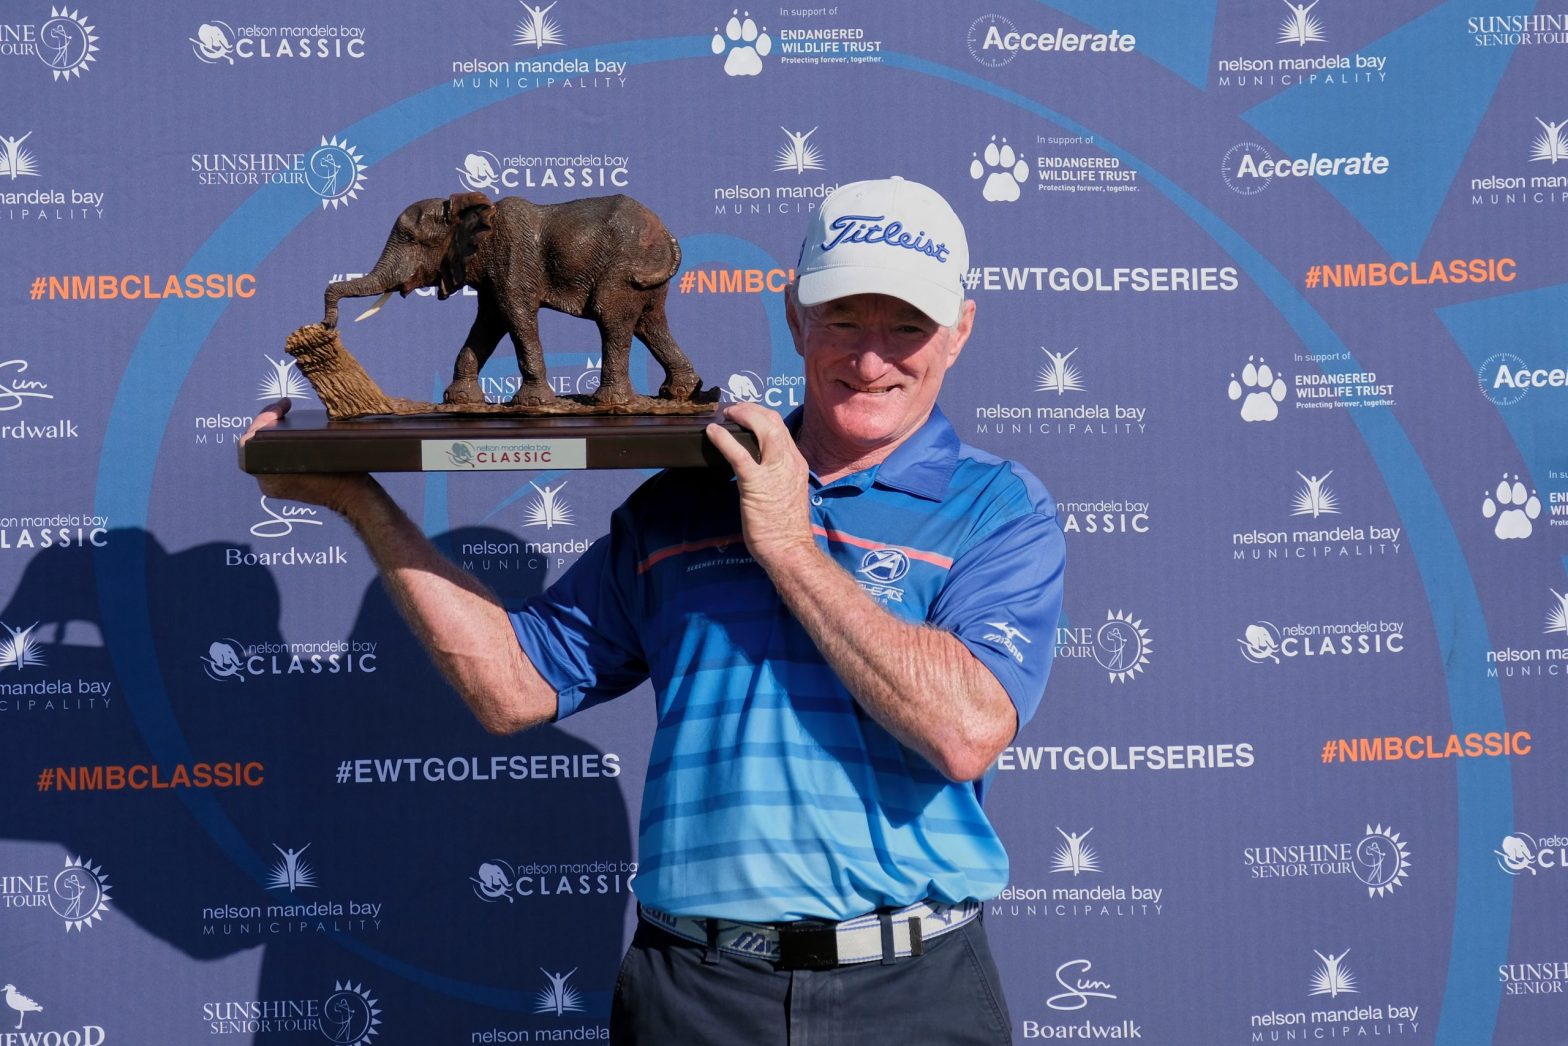 Williams given Major boost with Nelson Mandela Bay Classic win